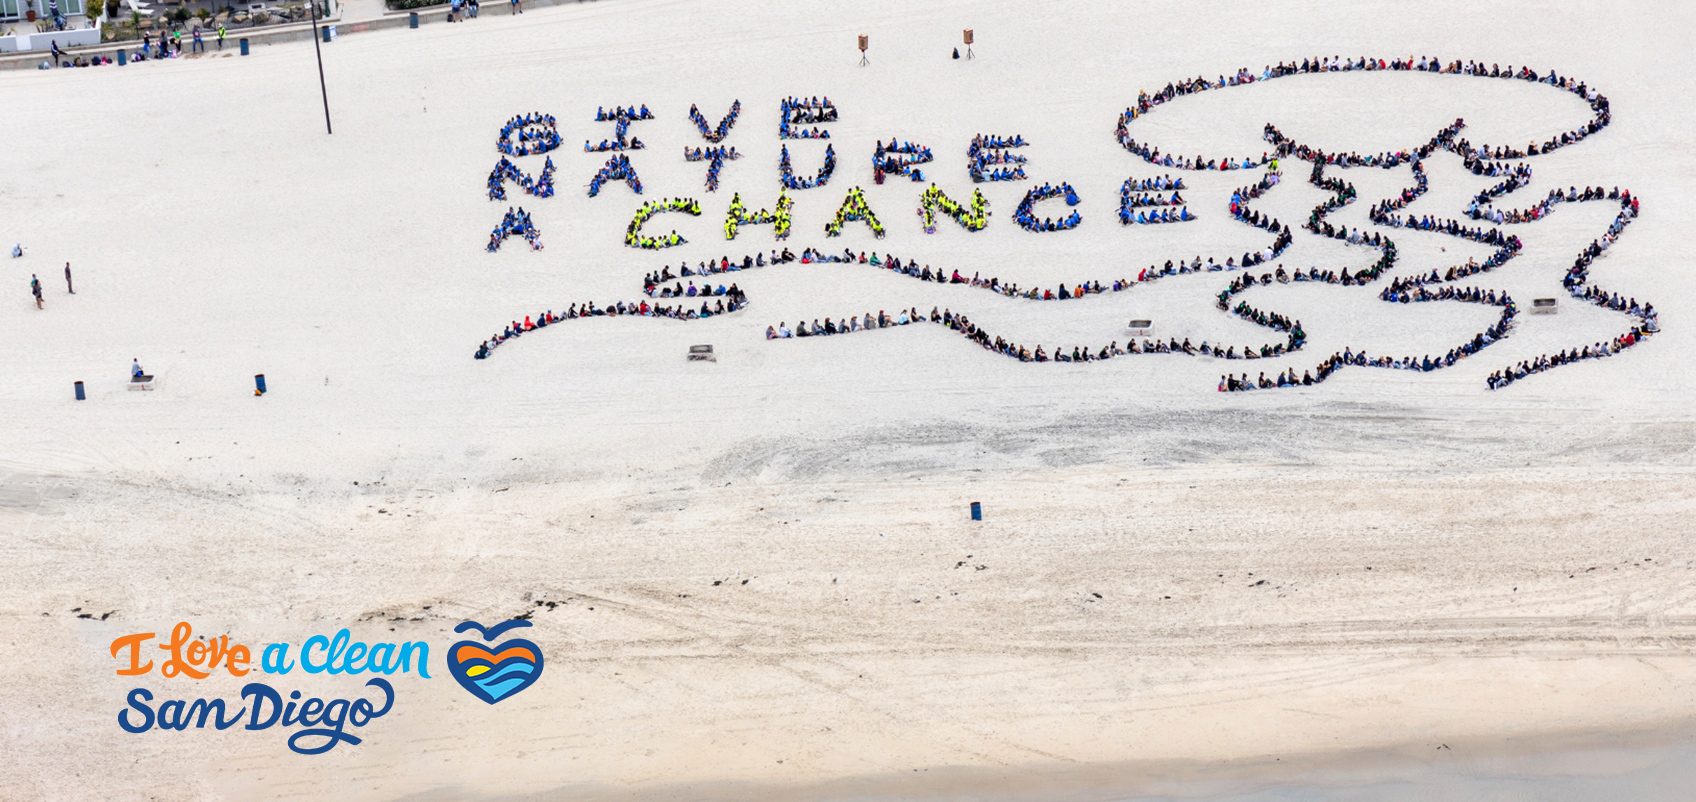 People who participated in the beach cleanup lined up to form the words GIVE NATURE A CHANCE